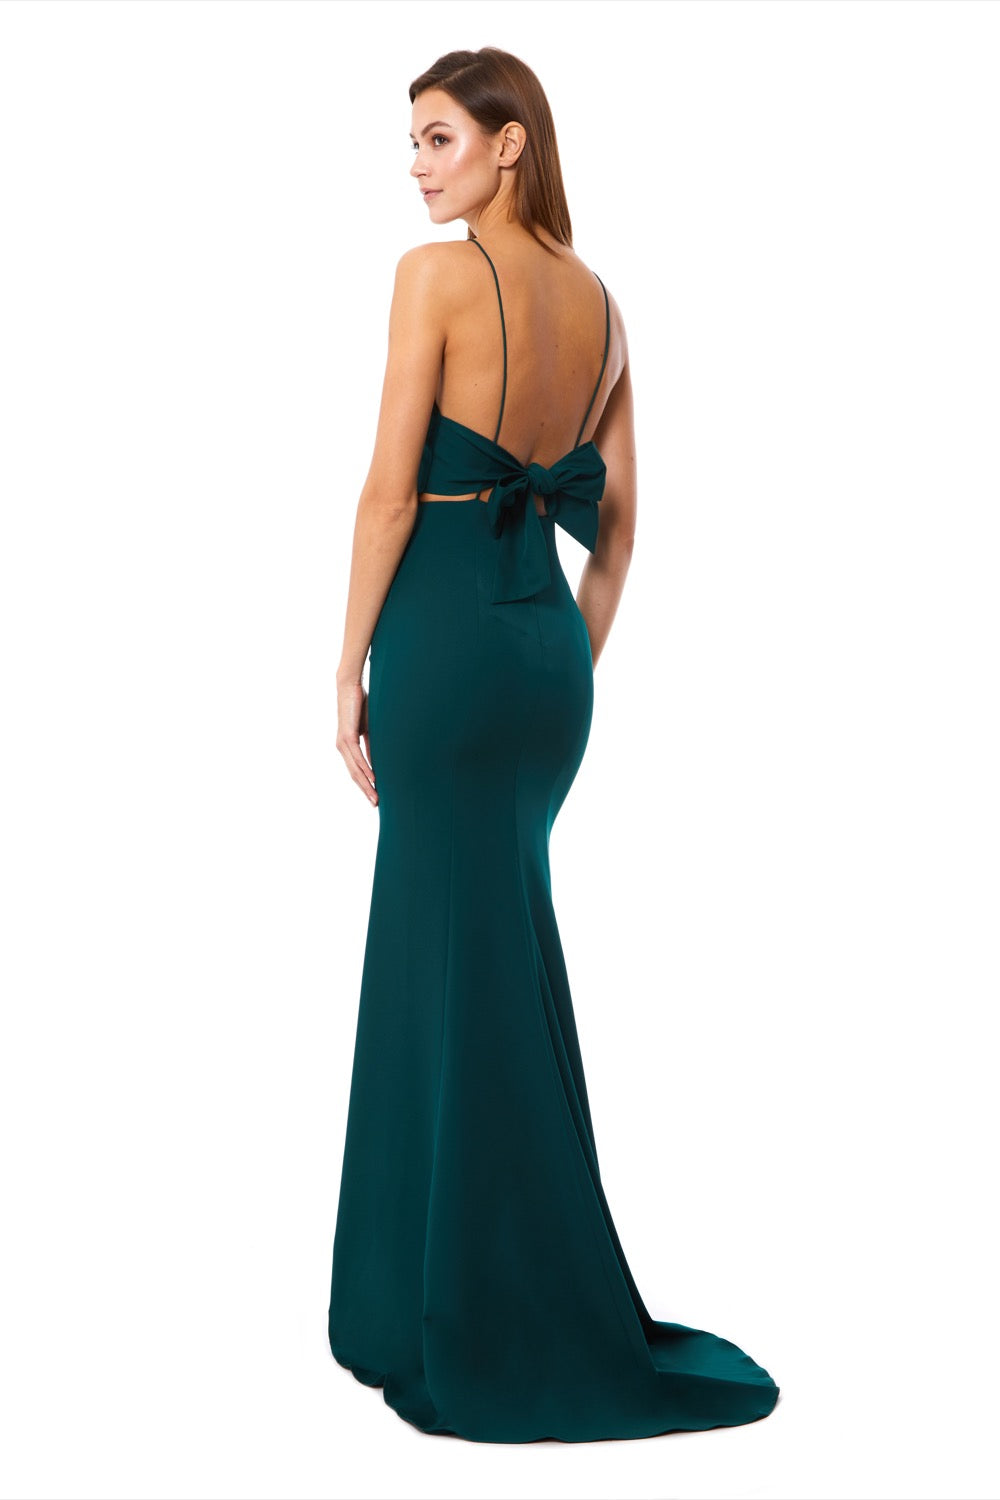 Jemima Square Neck Maxi Dress with Open Back, UK 16 / US 12 / EU 44 / Forest Green